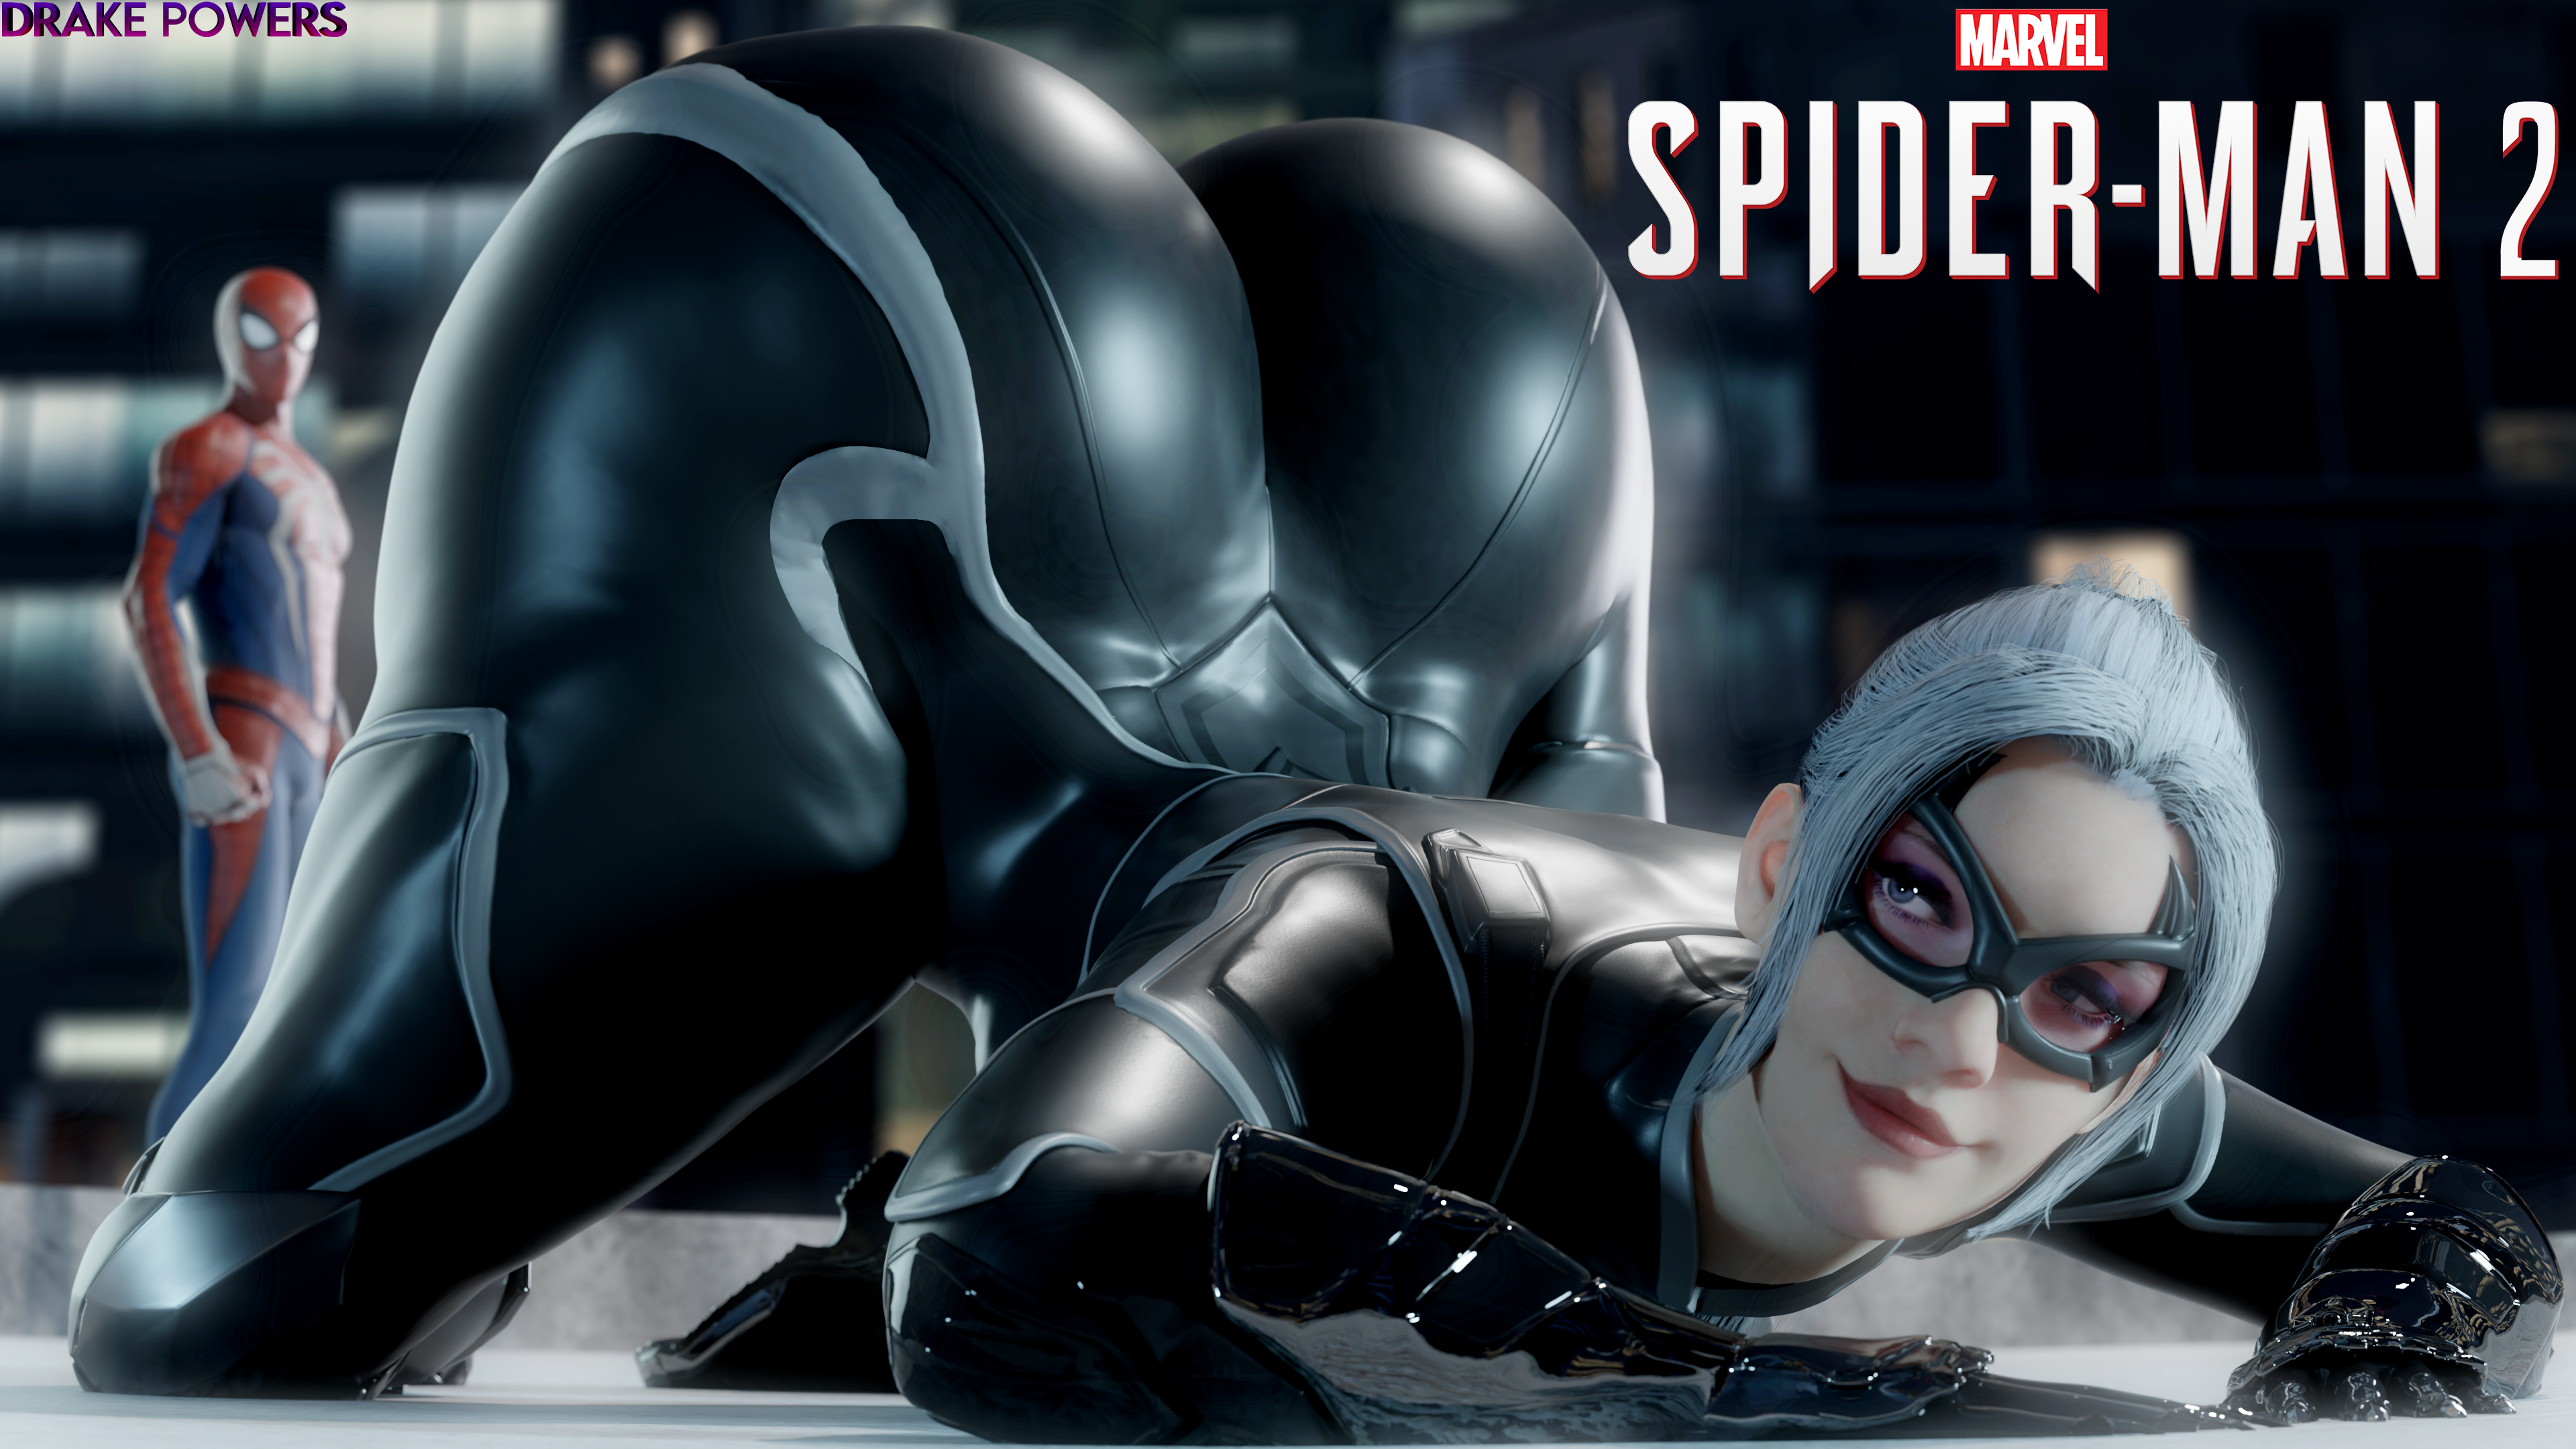 Black Cat Spider Man Porn - Rule34 - If it exists, there is porn of it / drakepowers, black cat (marvel)  / 7070813